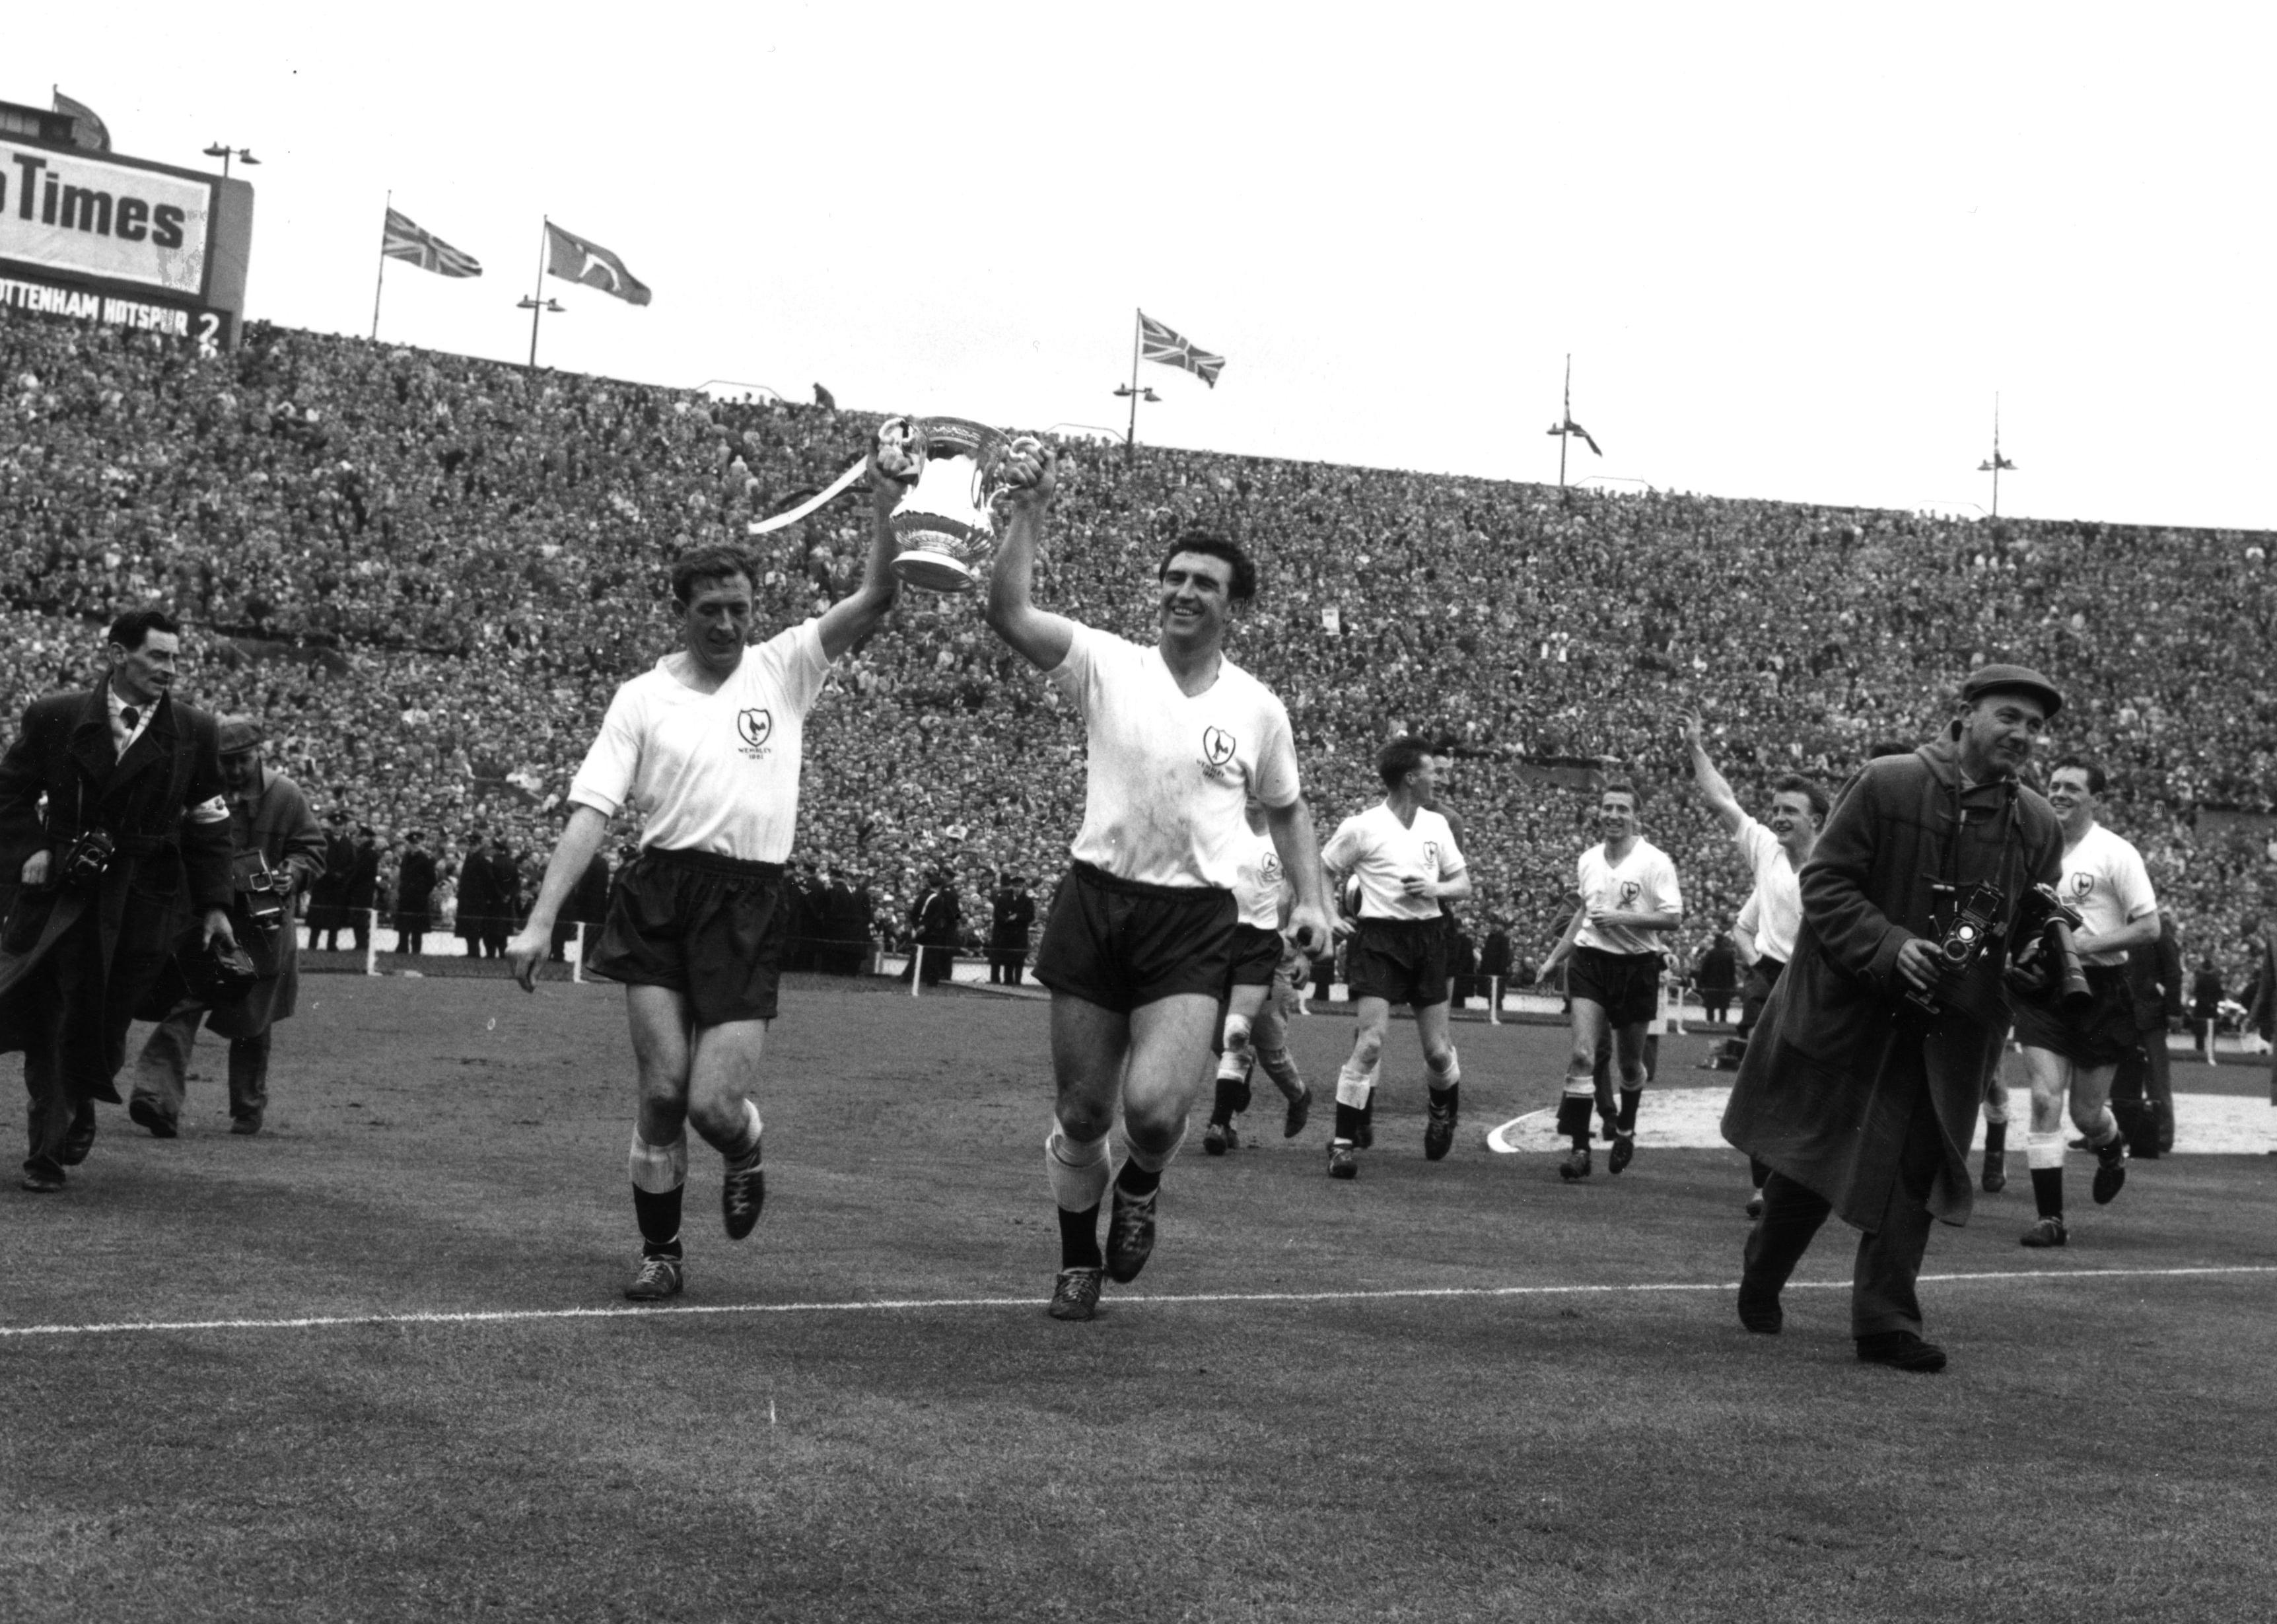 Tottenham Hotspur players carry the FA Cup trophy on a victory lap.